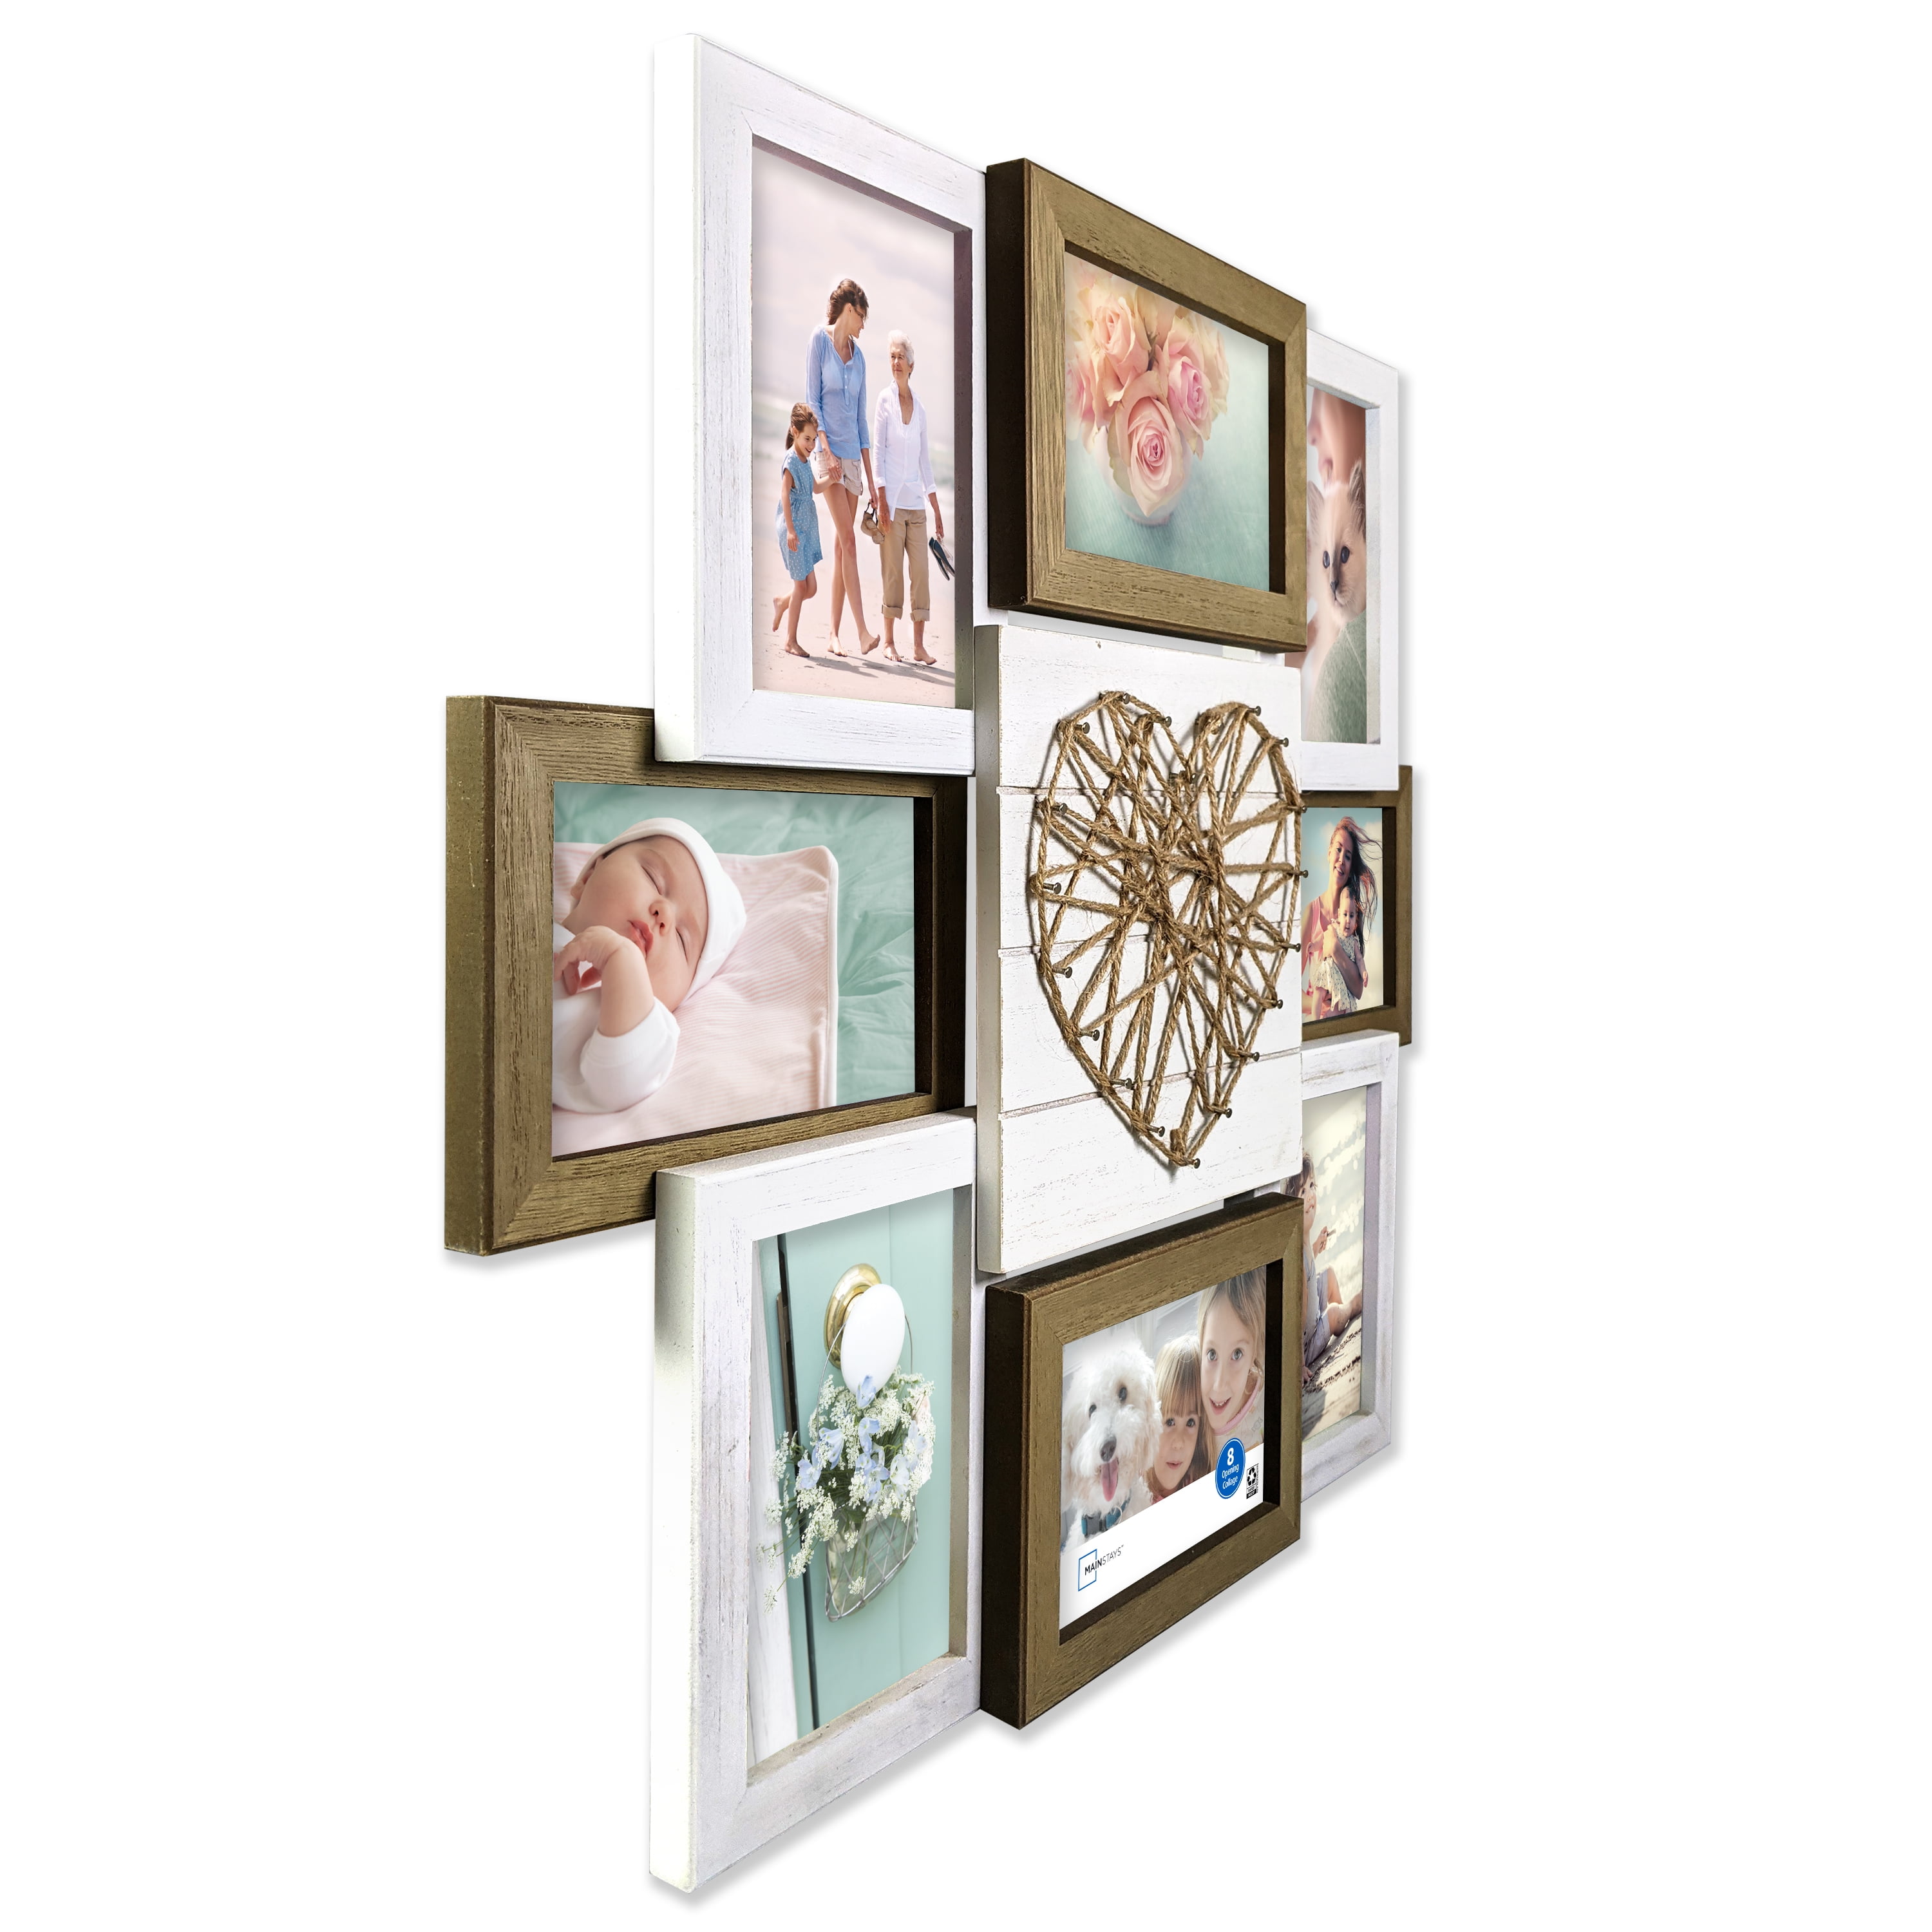 10" X 8" inches Cream Mount LARGE MULTI APERTURE PICTURE FRAME FITS 5 PHOTOS 